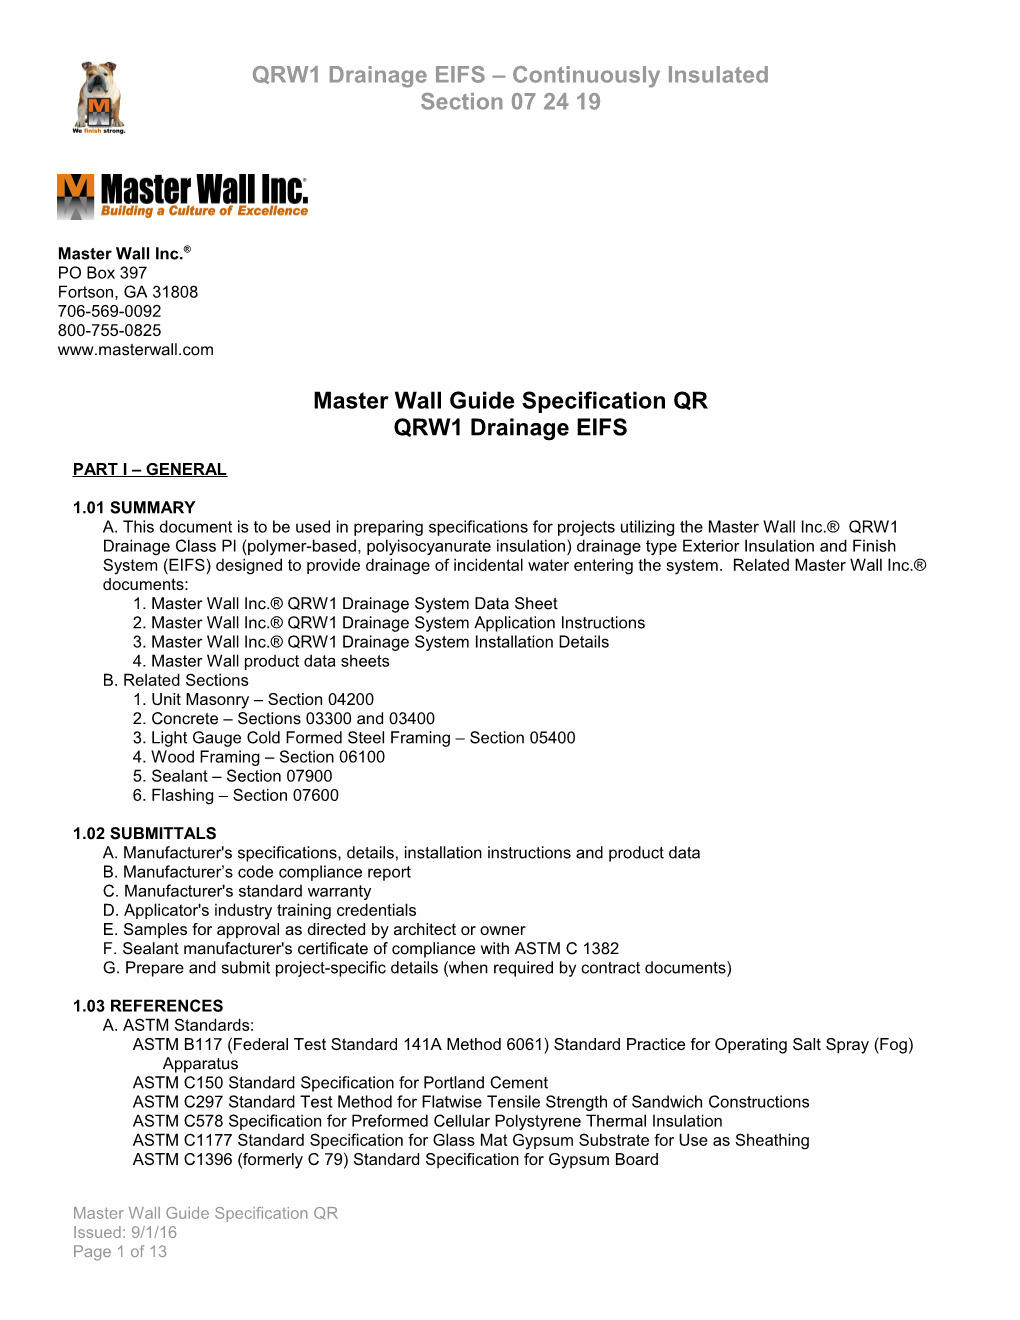 Master Wall Guide Specification QR